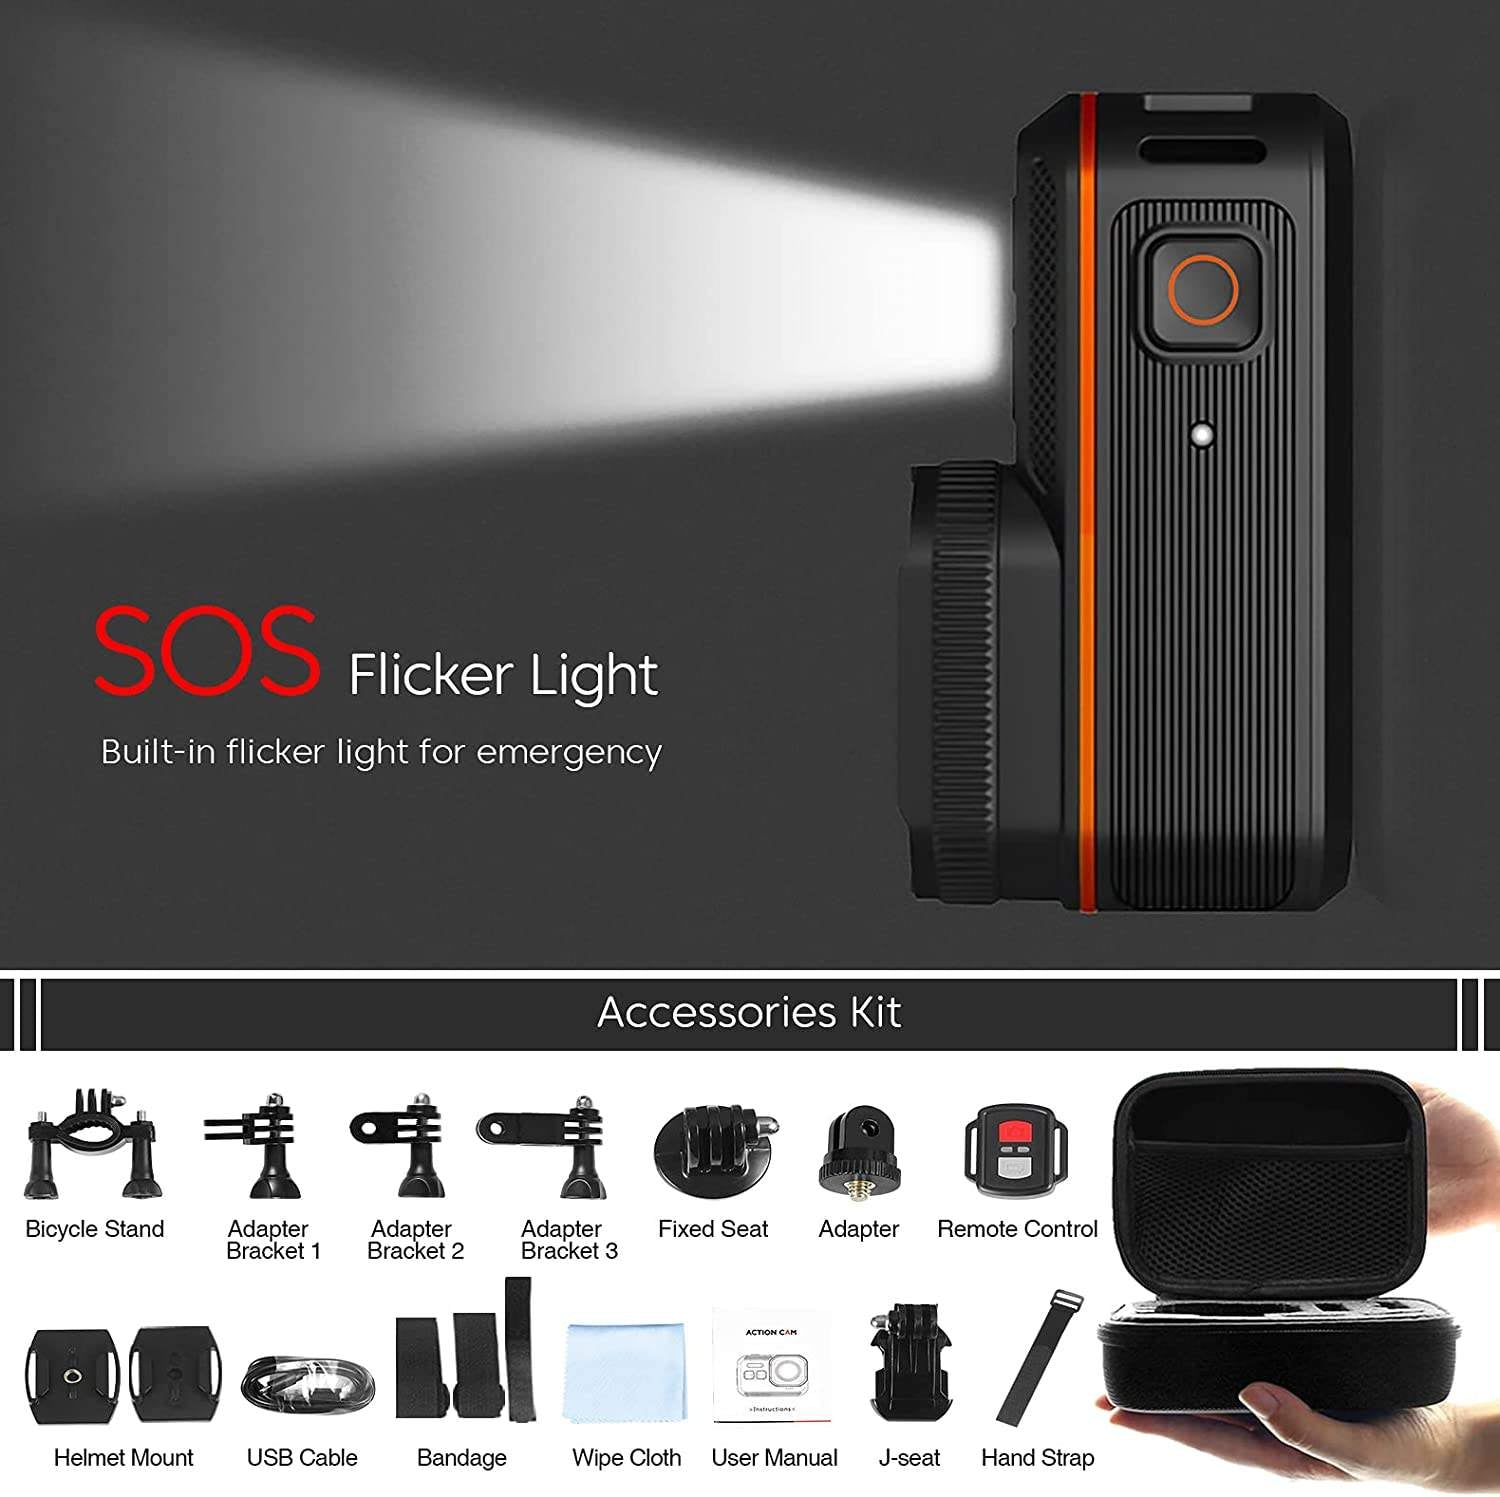 4k Action Camera 60fps with EIS Stabilization, Remote Control, WiFi